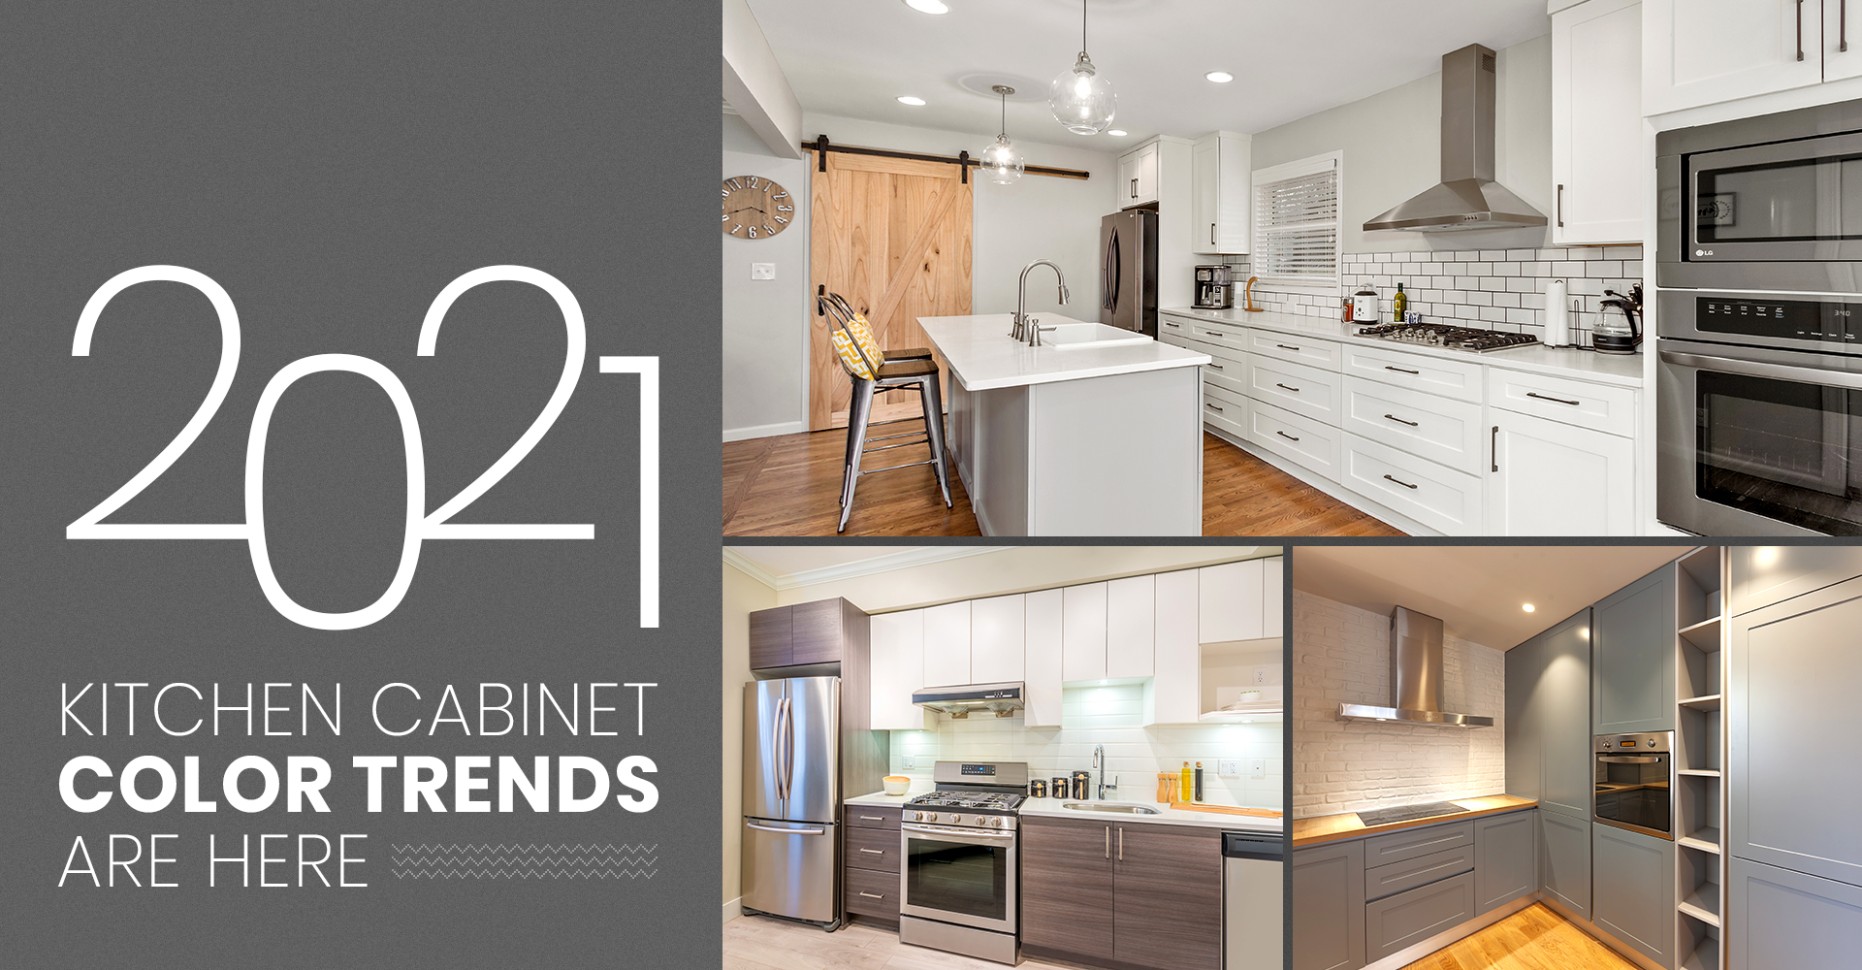 10 Kitchen Cabinet Color Trends Are Here  CabinetCorp - what is the latest trend in kitchen cabinets?